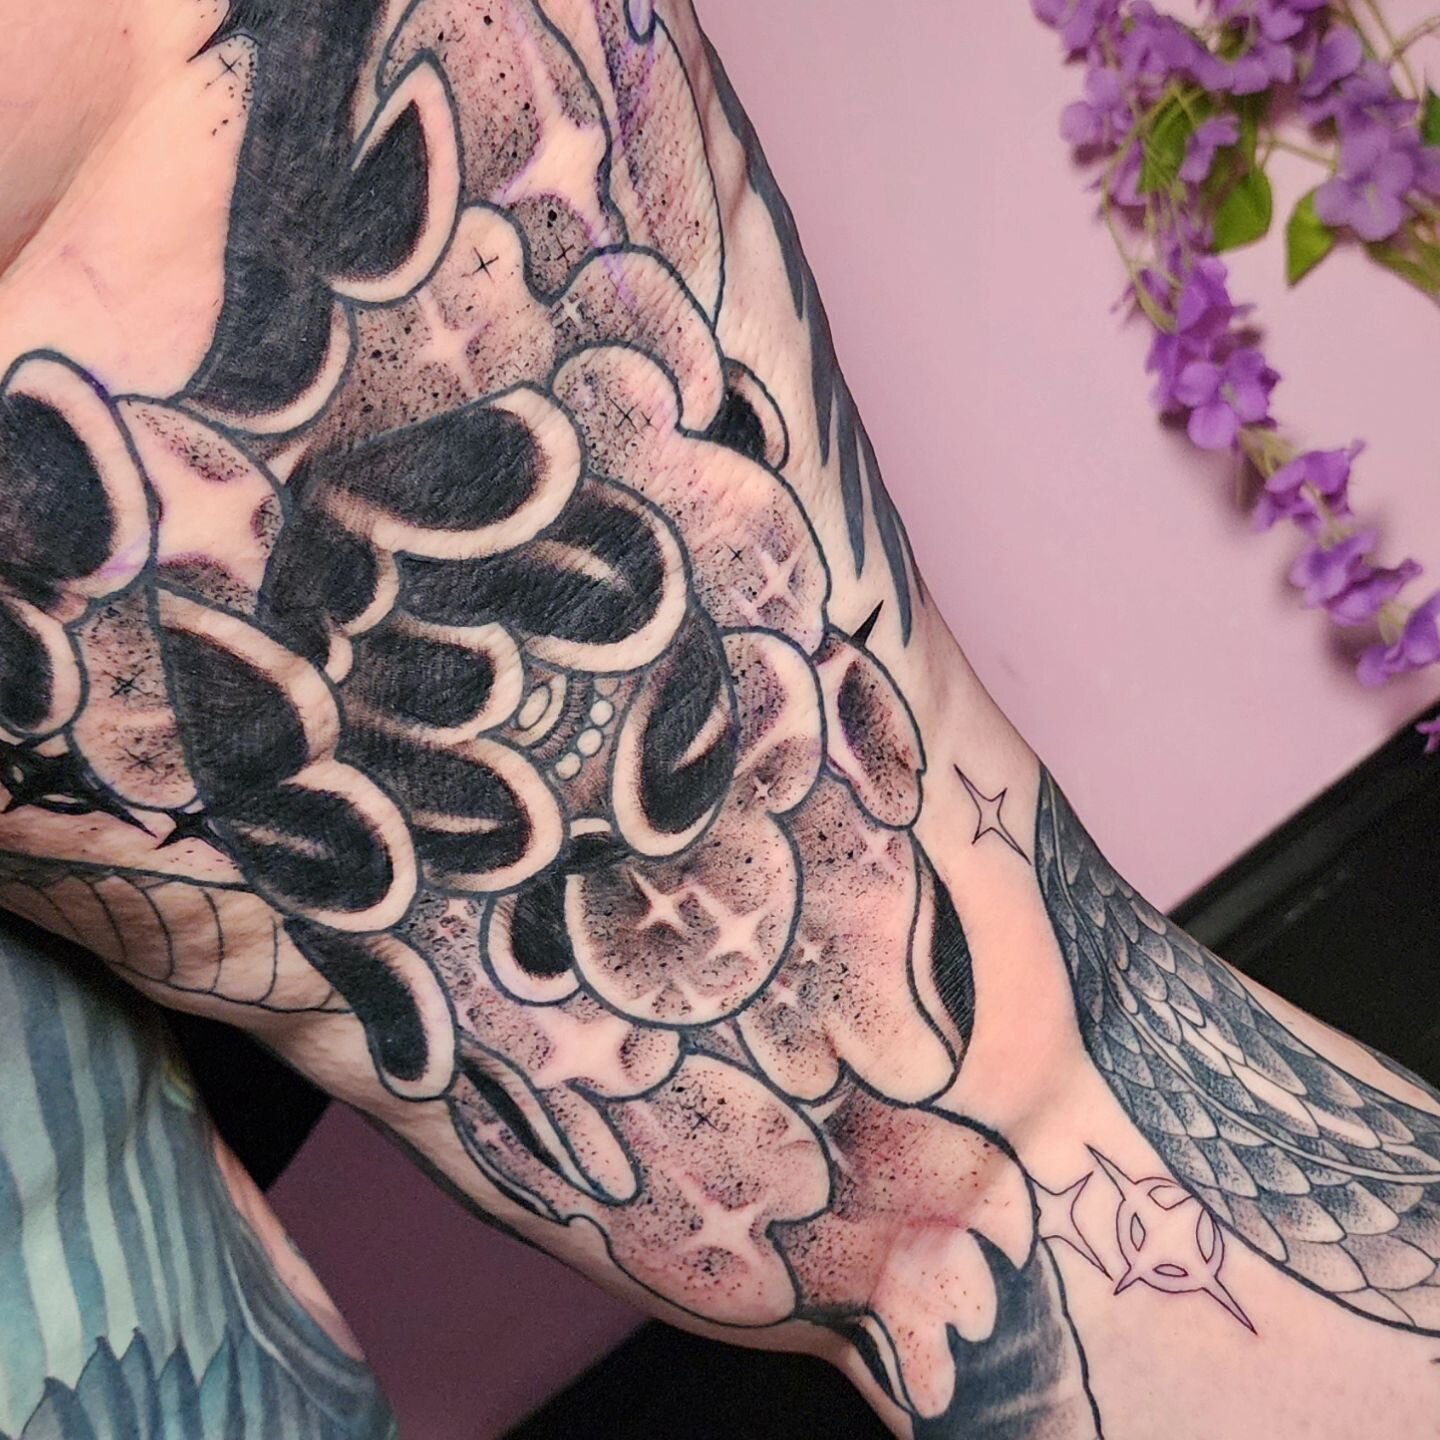 Cosmic Peony
Making progress on this leg sleeve for @aphonia 

Made at the pink palace @pearlstreettattoo